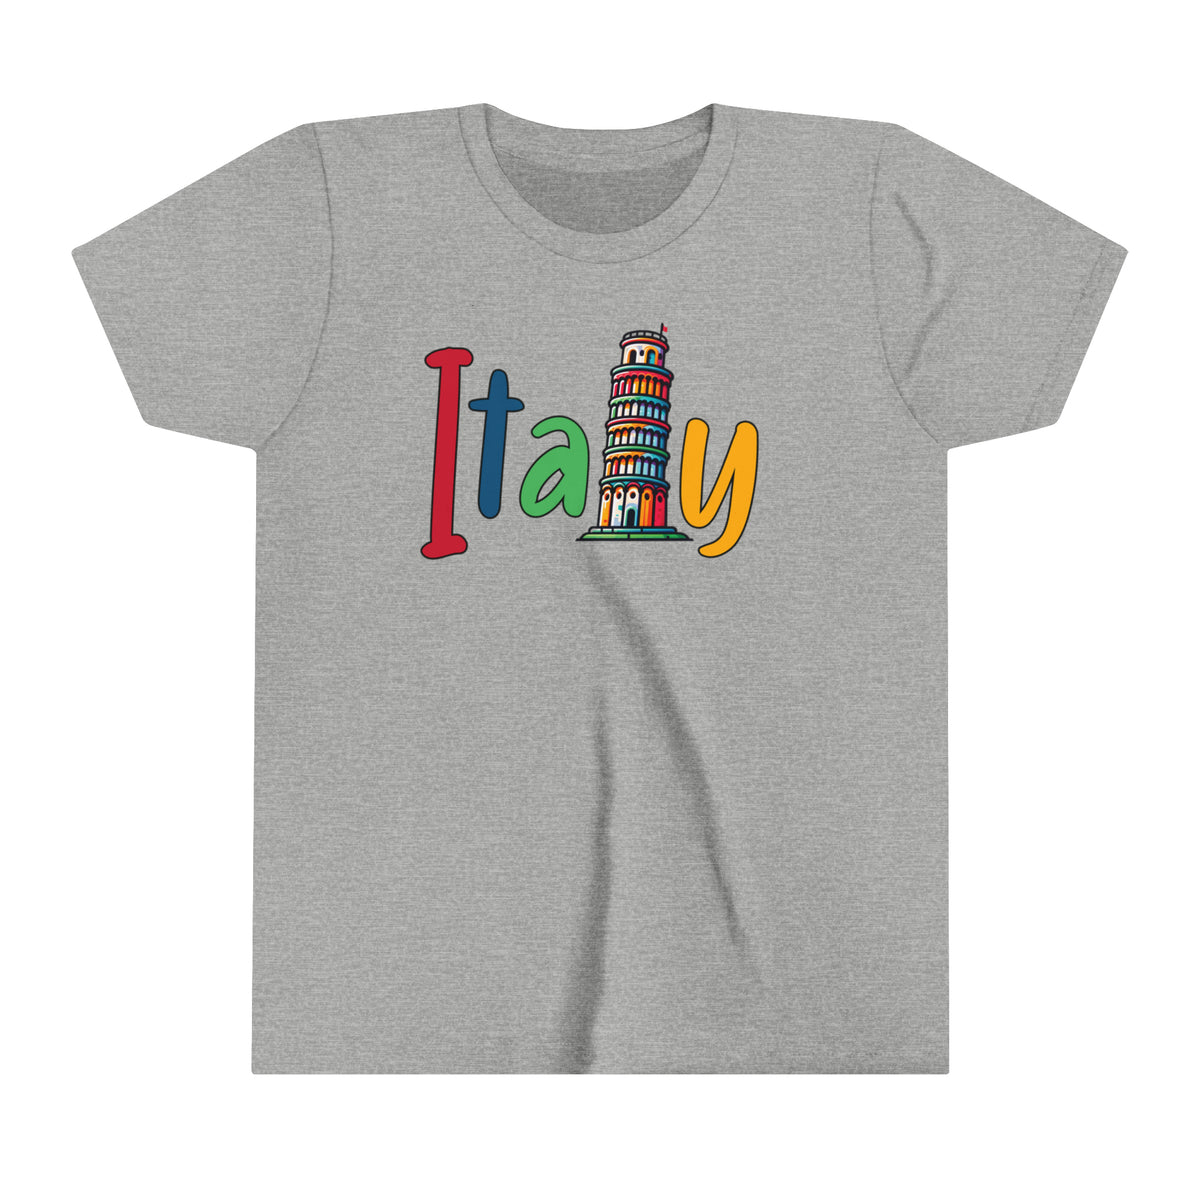 Cute Italy Trip shirt | Italy Vacation Shirt | World Traveler Italian Gift | Leaning Tower of Pisa | Super Soft Youth Jersey T-shirt